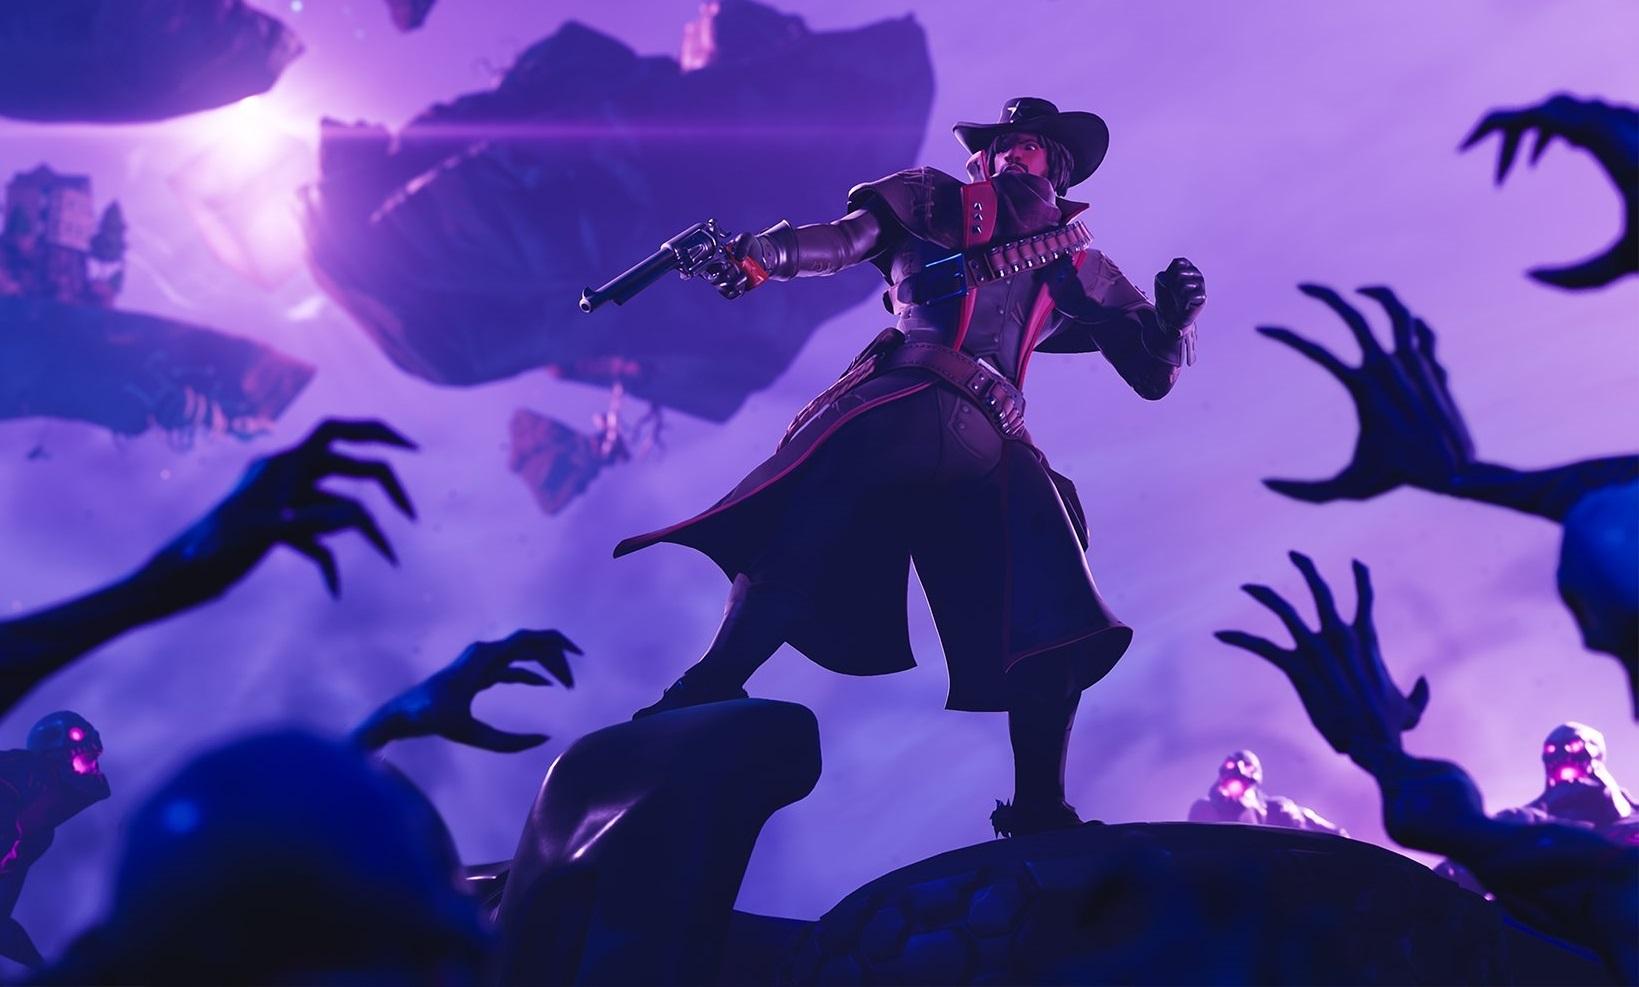 epic games says fortnite s halloween update is the stuff of fortnitemares - fortnite halloween